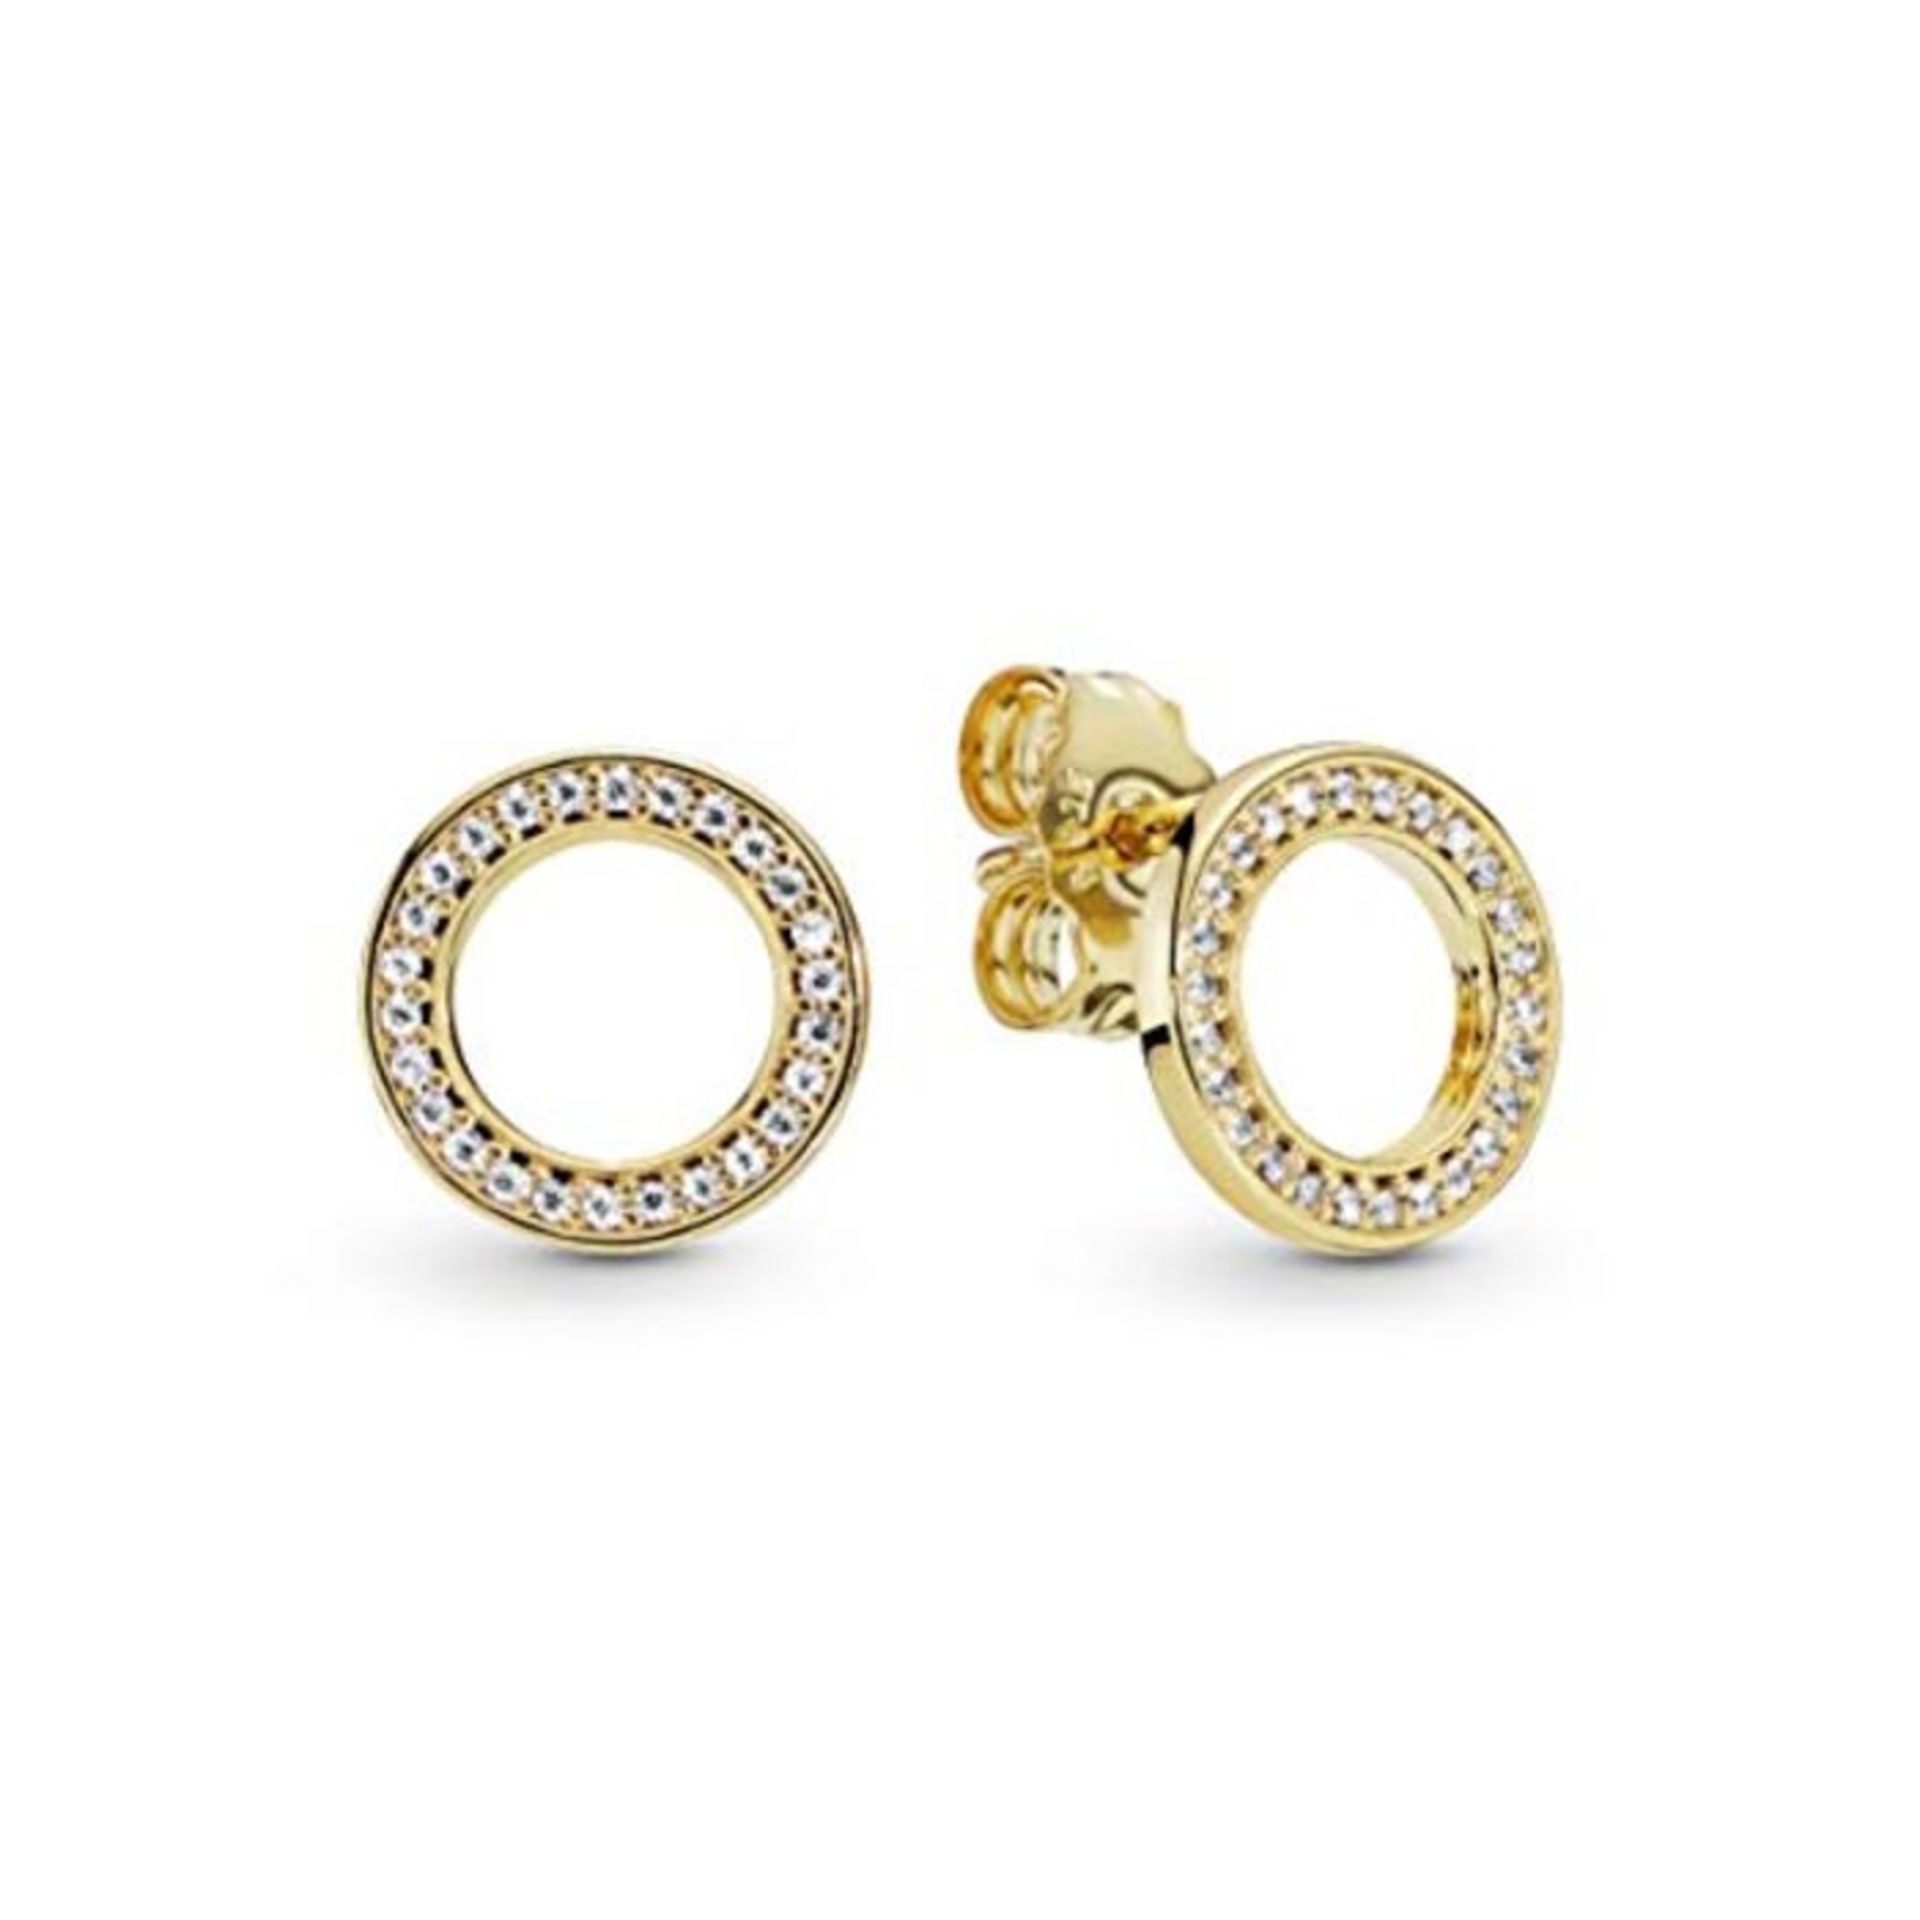 RRP £60.00 Pandora Signature Sparkling Circle Stud Earrings 18K Gold Plated Sterling Silver 1.3x9